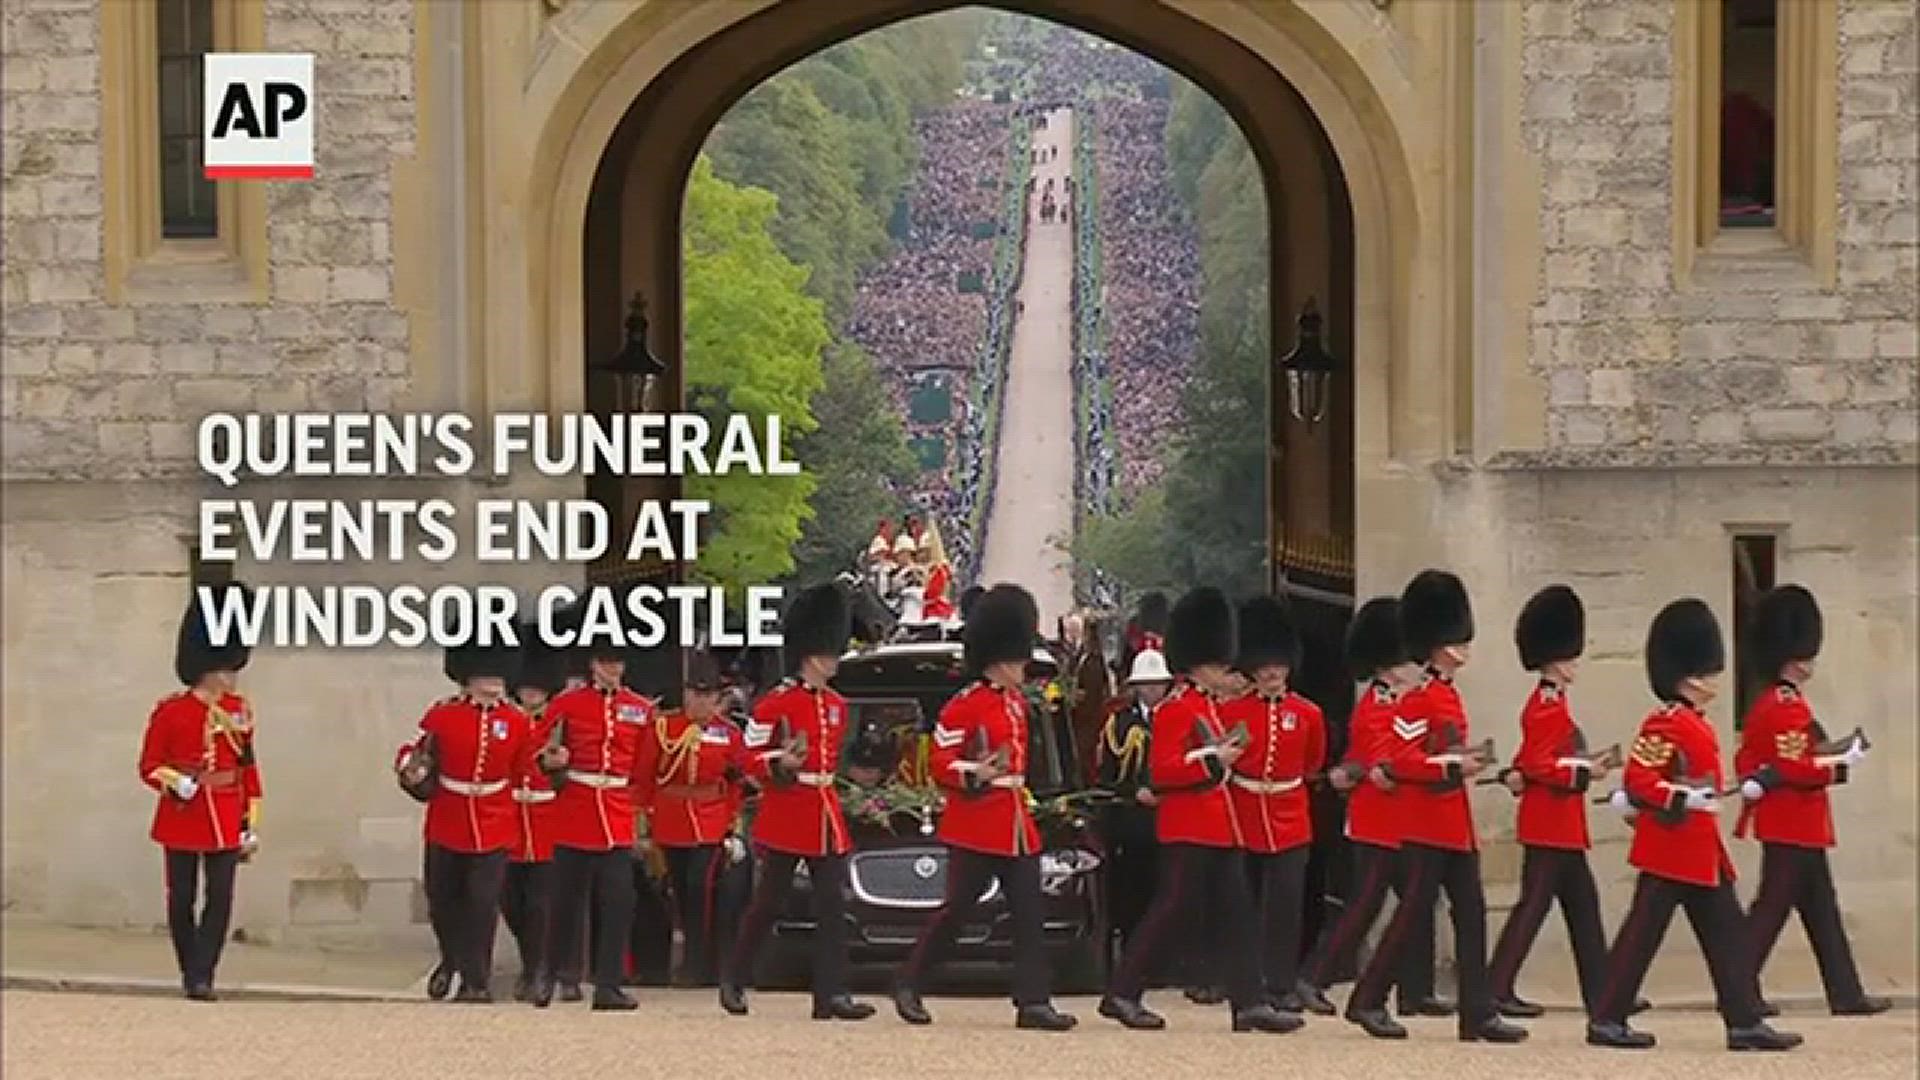 Hundreds of world leaders and dignitaries attended the funeral service while tens of thousands of people lined the streets in central London to pay their respects.